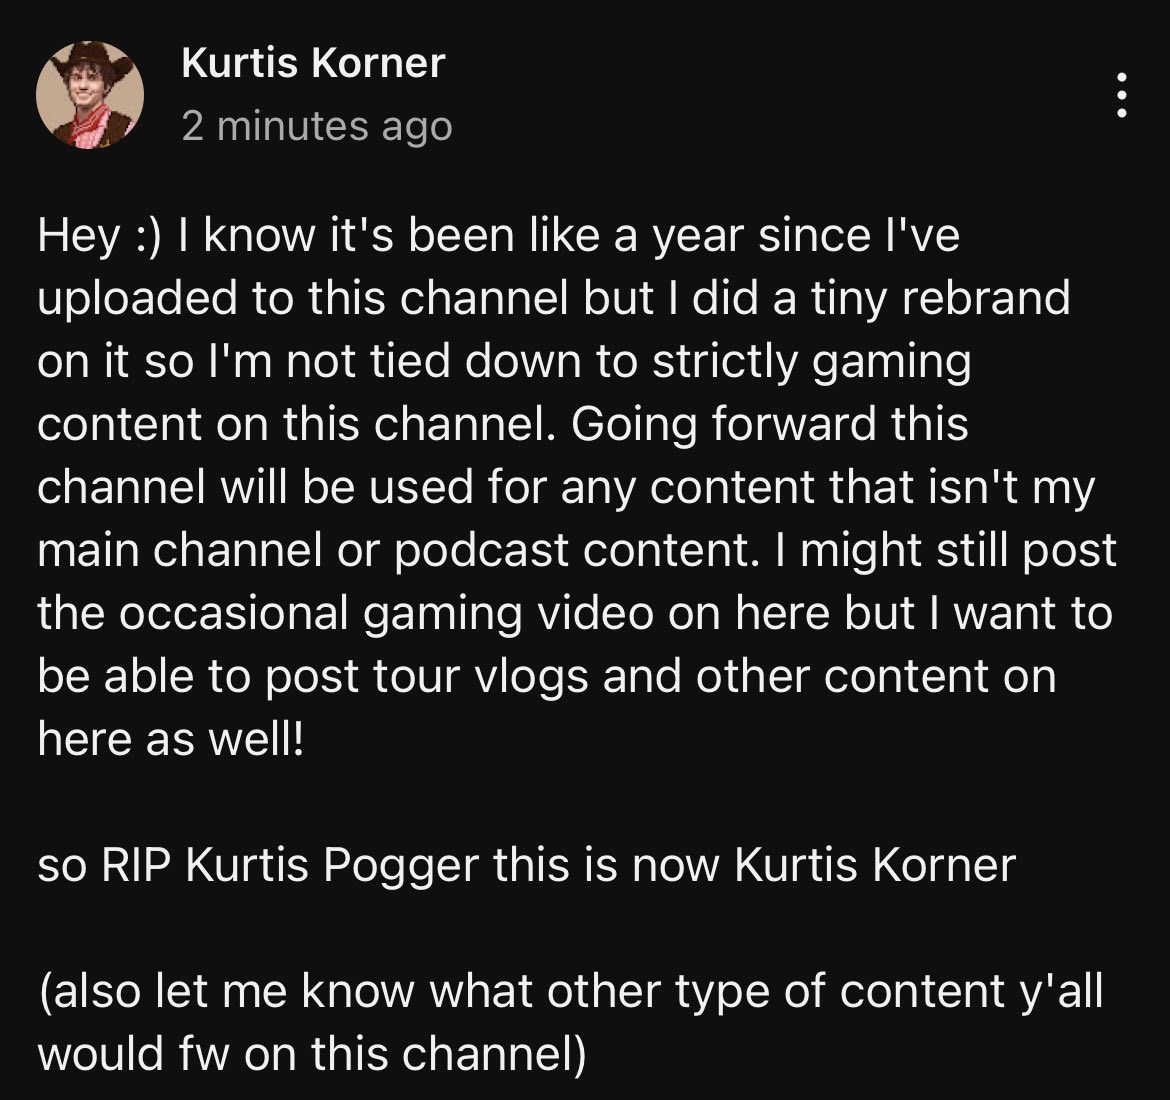 my fav youtuber Kurtis Pogger just posted this omg I’m so excited for him